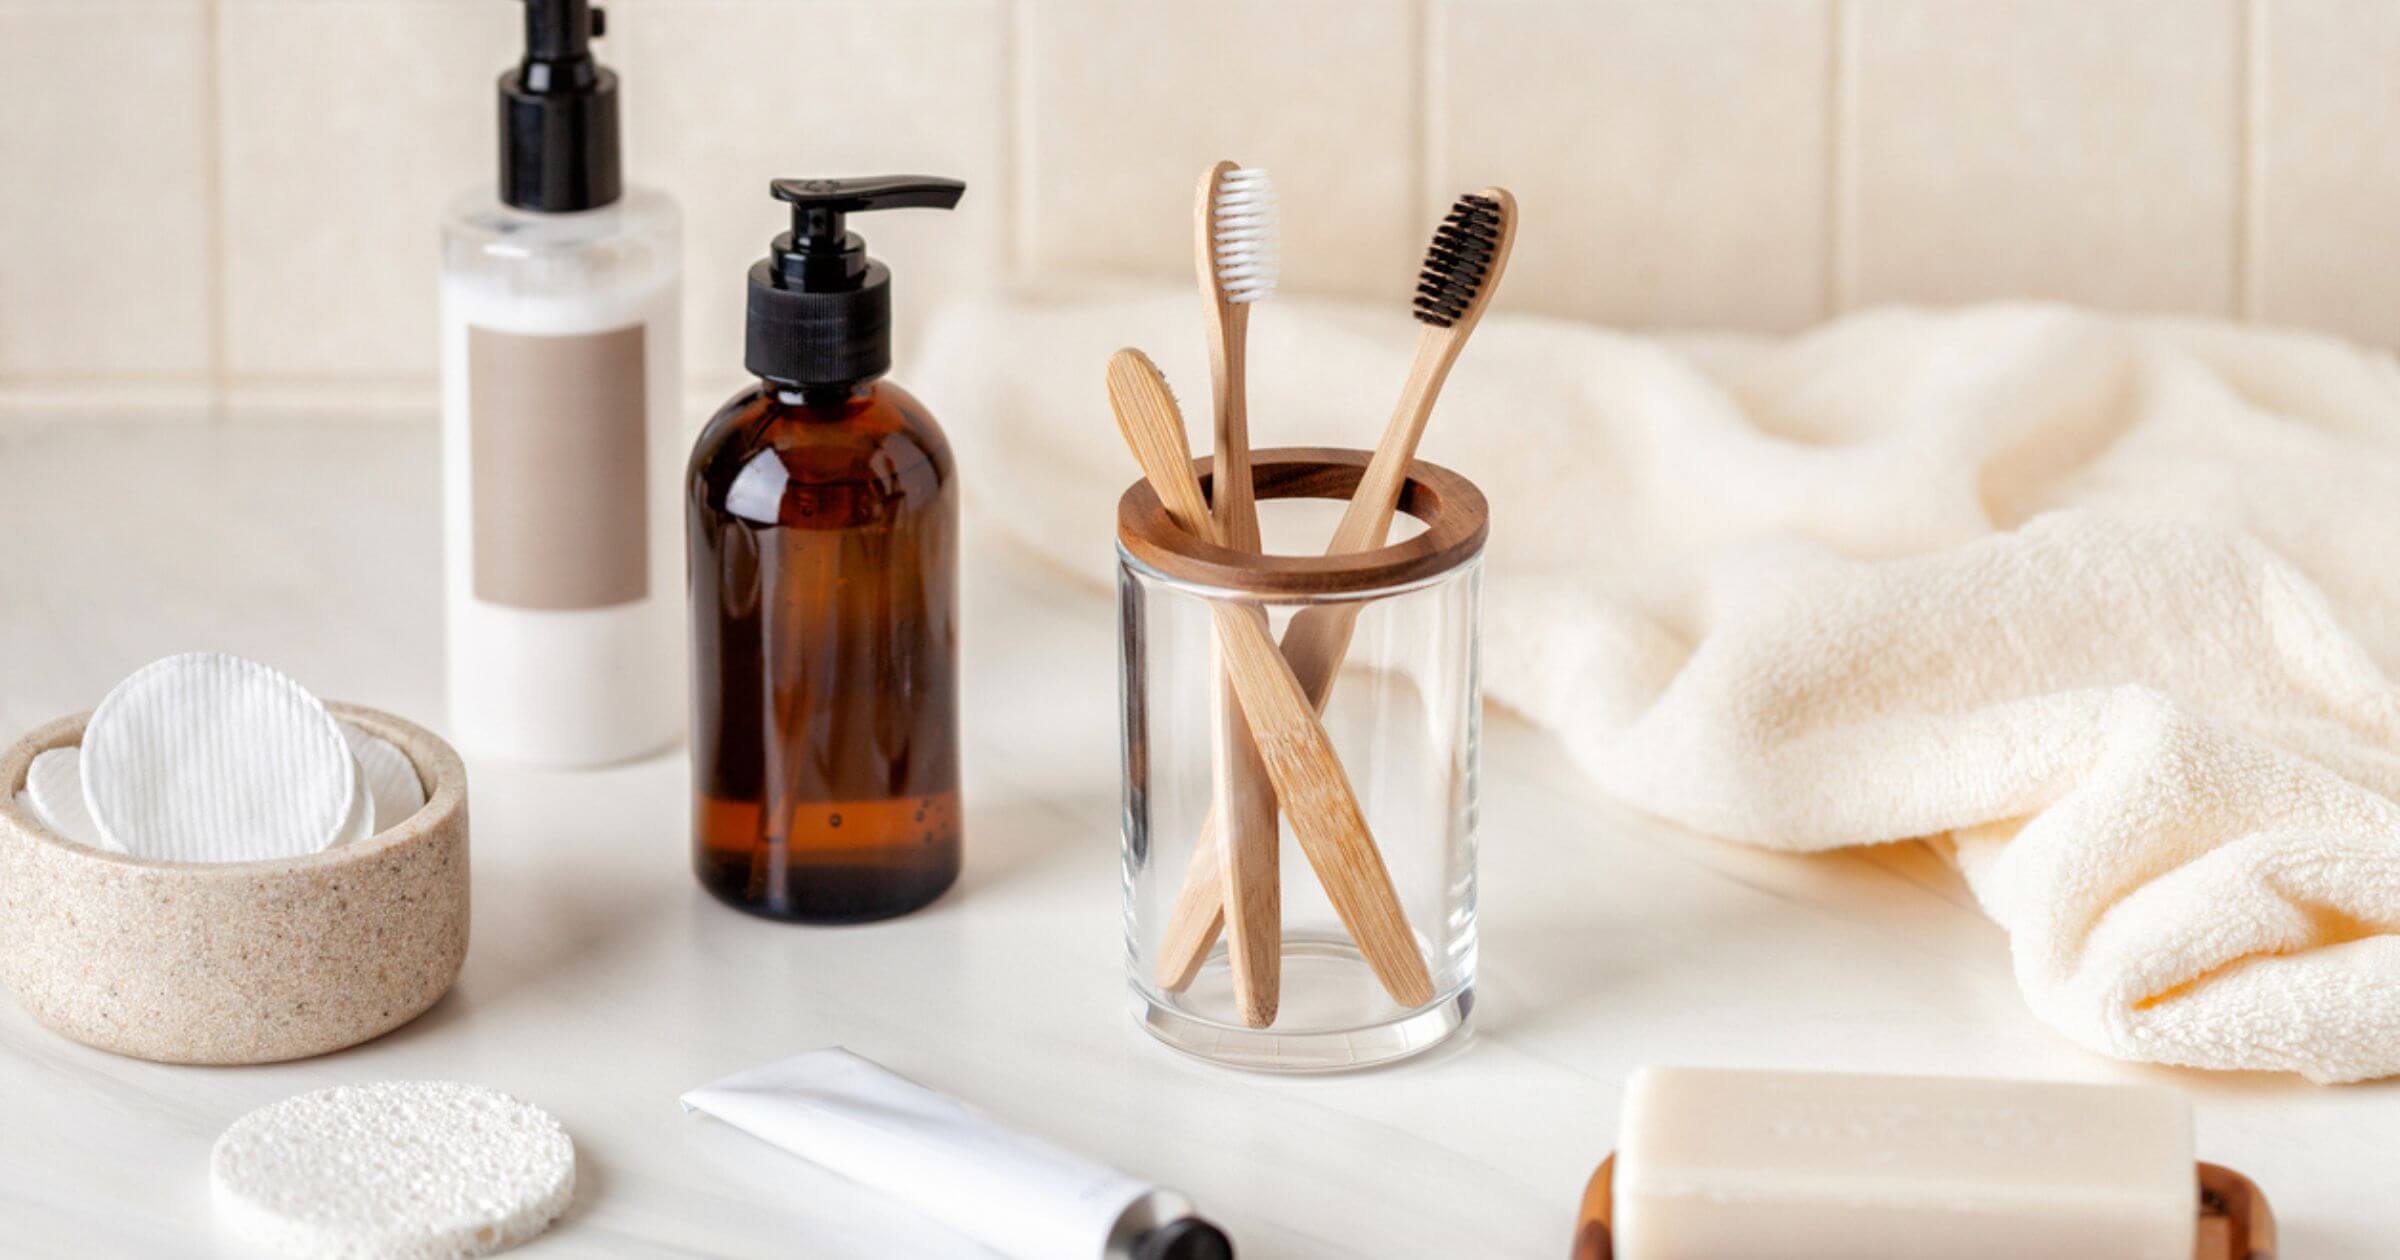 Plastic-free bathroom products with a neutral background including bamboo toothbrush cotton pads and glass bottles